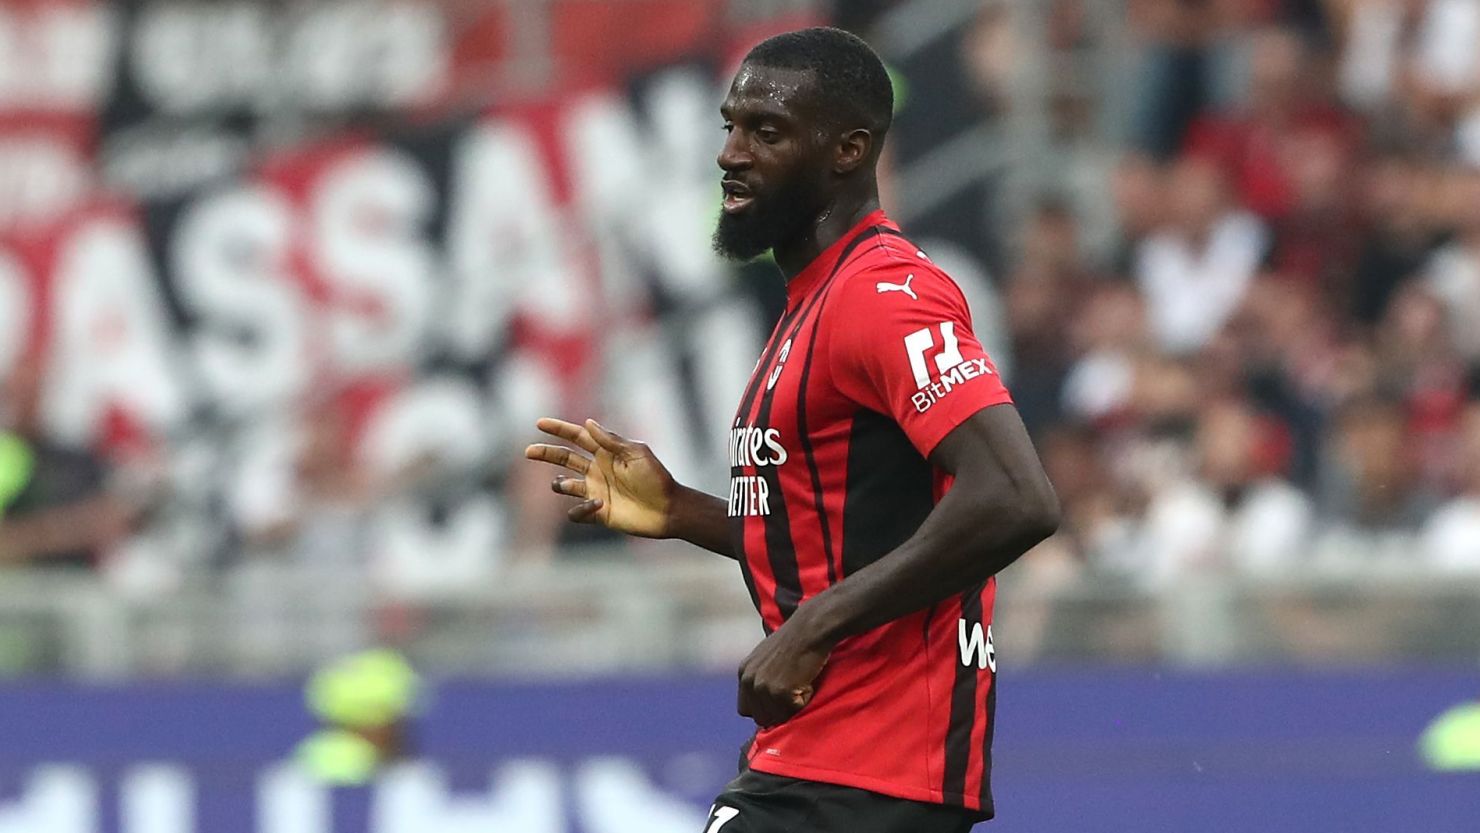 Tiémoué Bakayoko is playing for AC Milan on loan from Chelsea. 